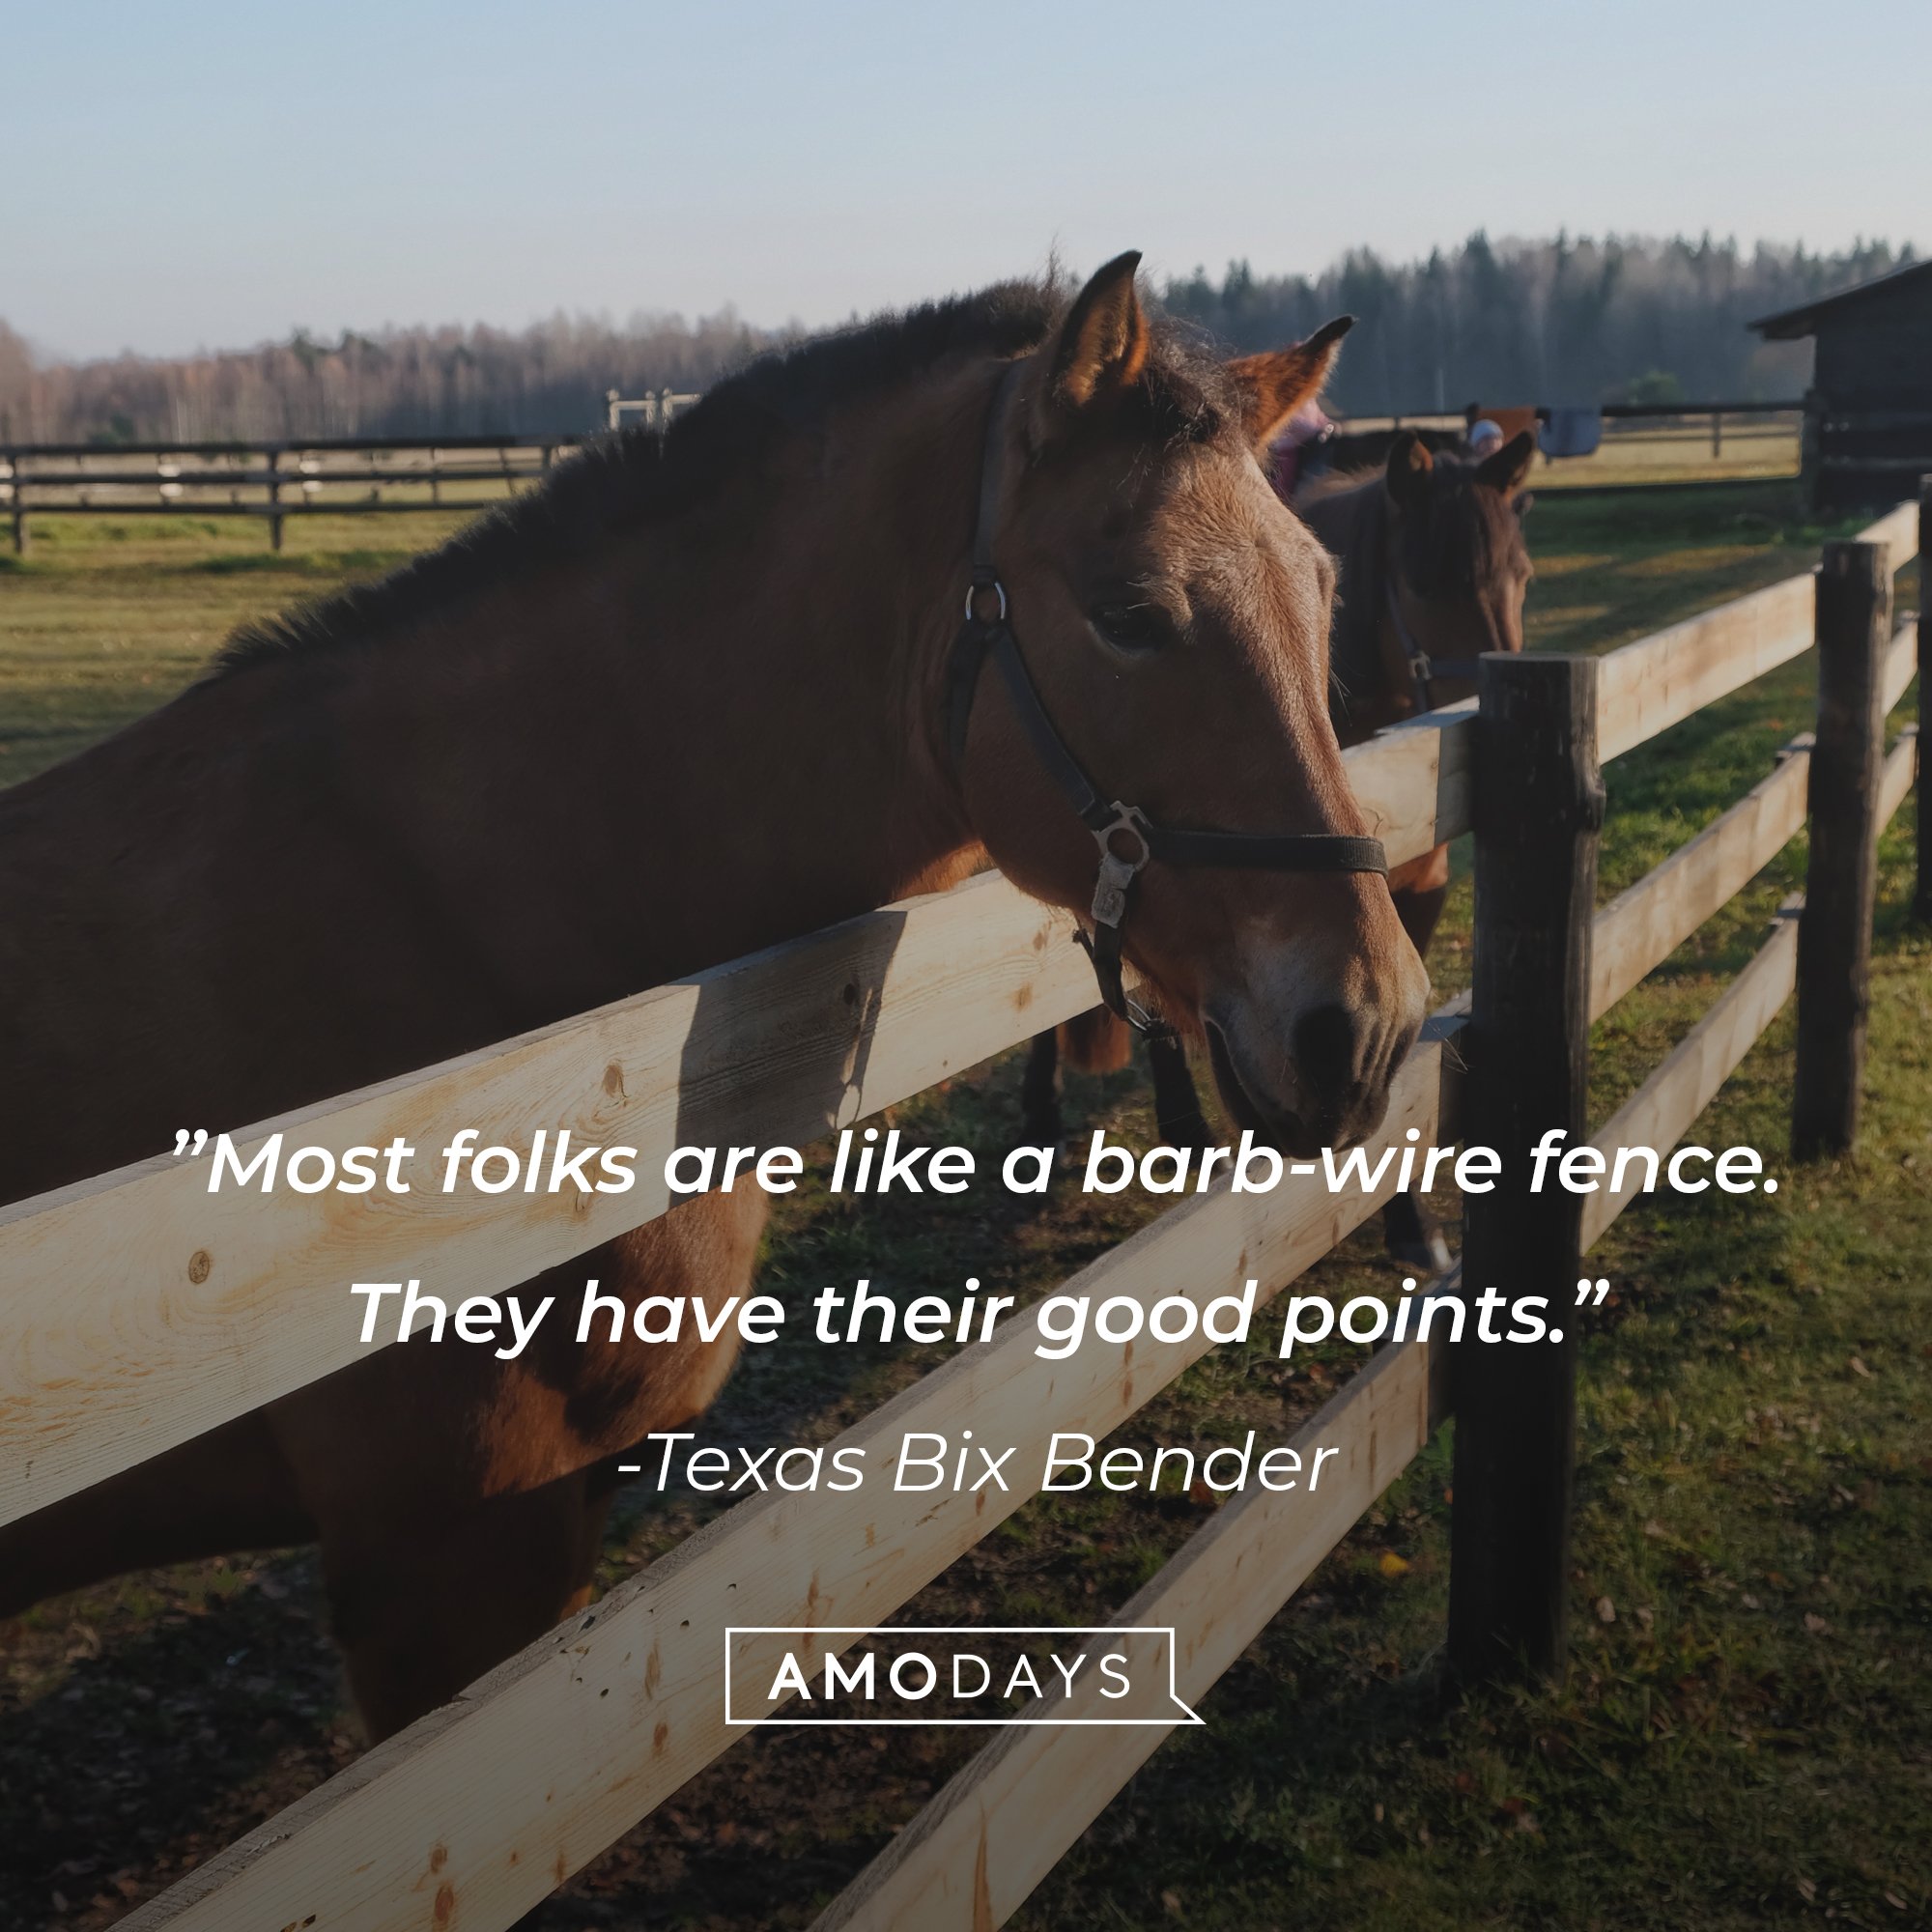 Texas Bix Bender's quote: "Most folks are like a barb-wire fence. They have their good points.” | Image: AmoDays